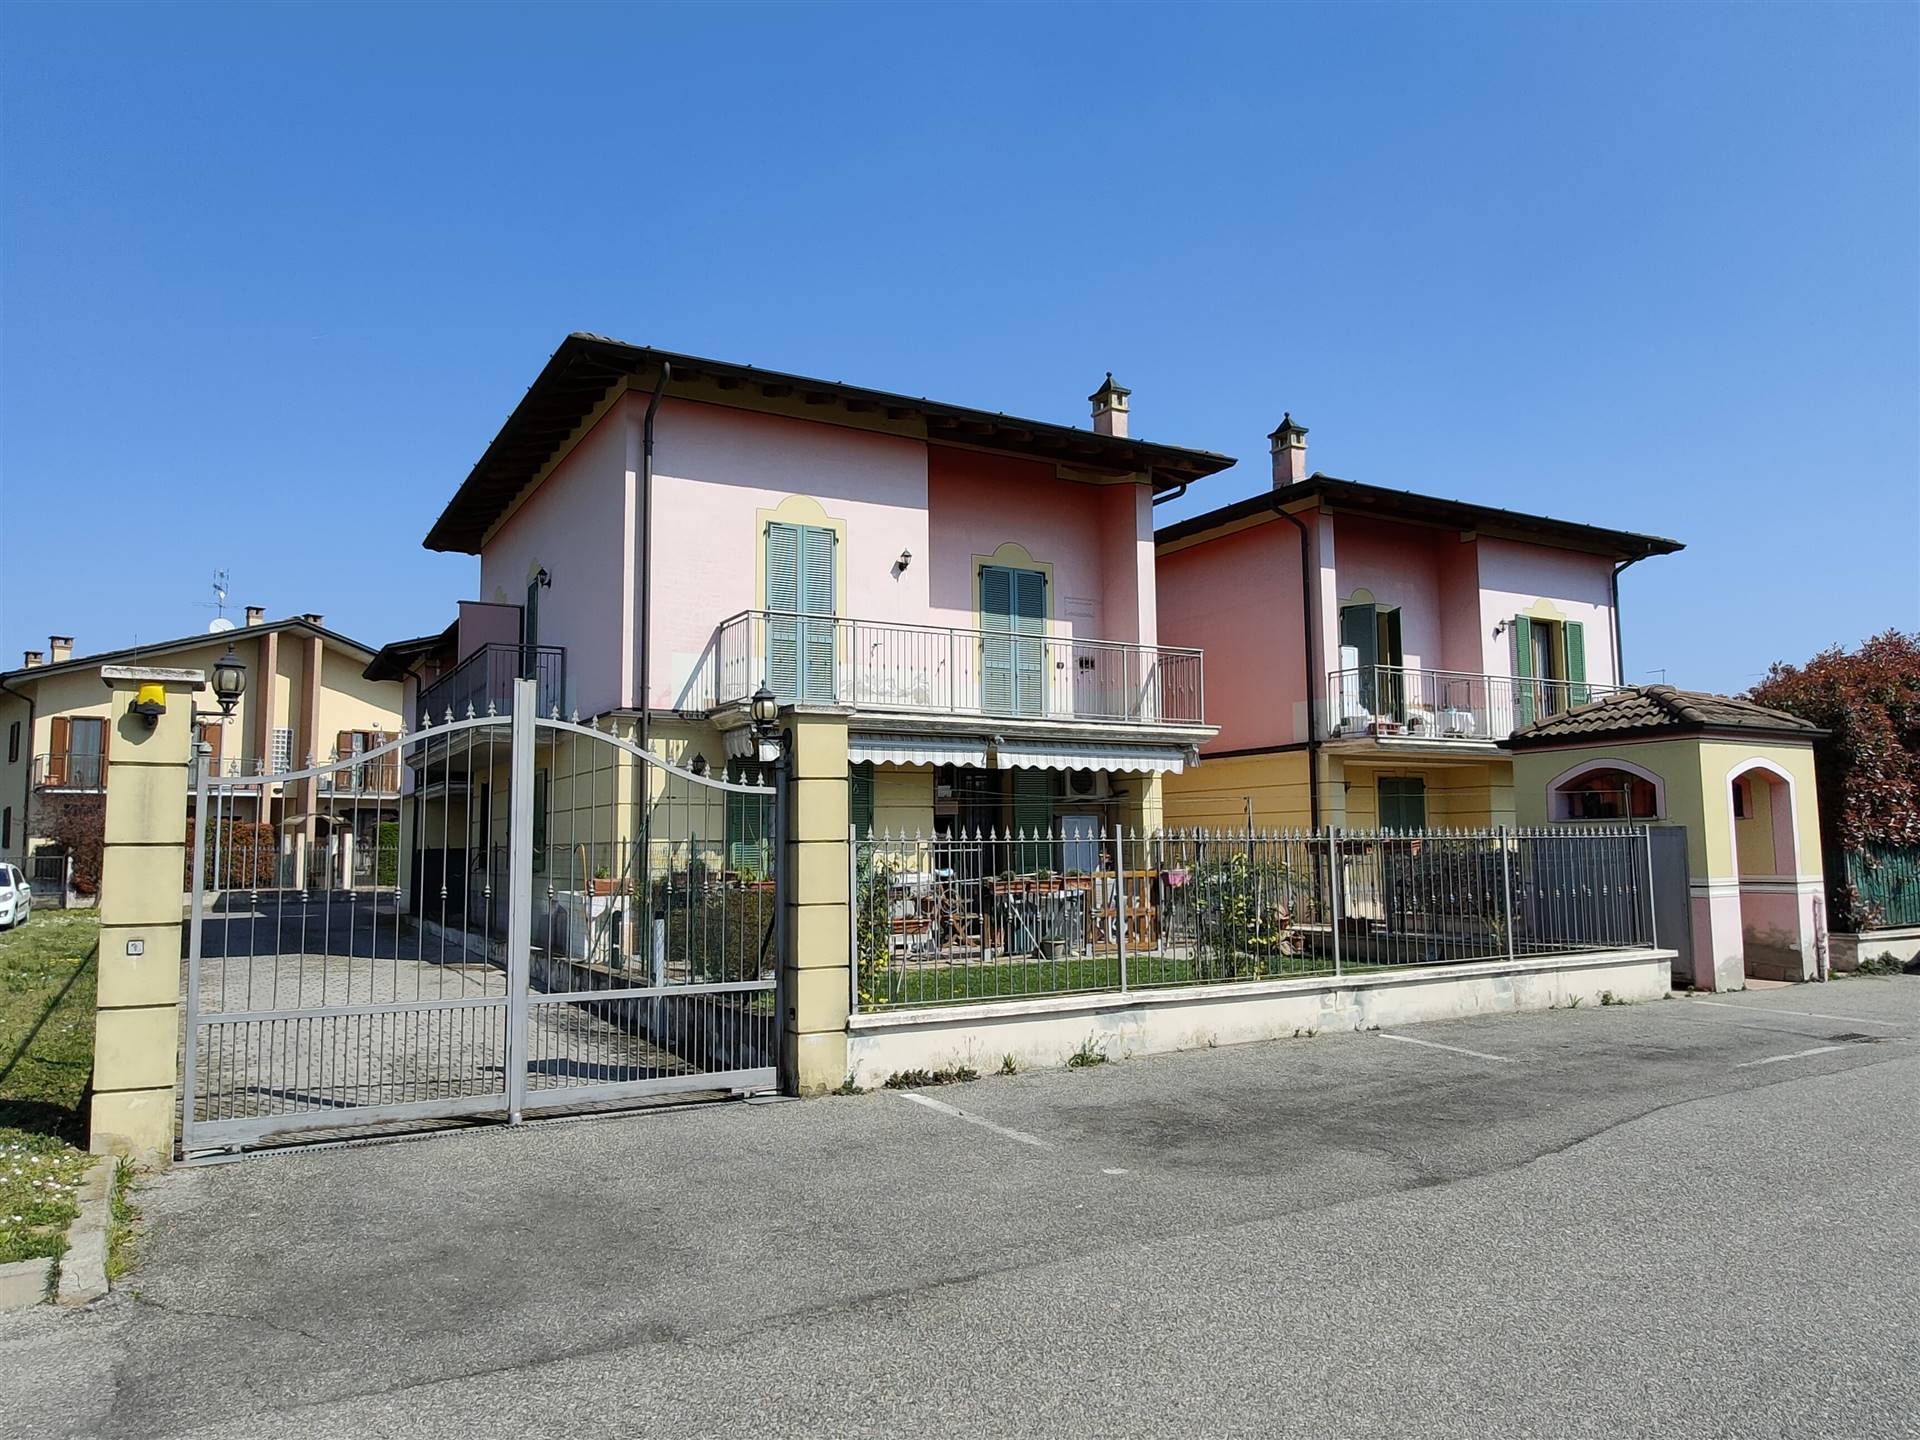 CASALETTO CEREDANO, Apartment for sale of 43 Sq. mt., Excellent Condition, Heating Individual heating system, Energetic class: E, placed at 1° on 2, 